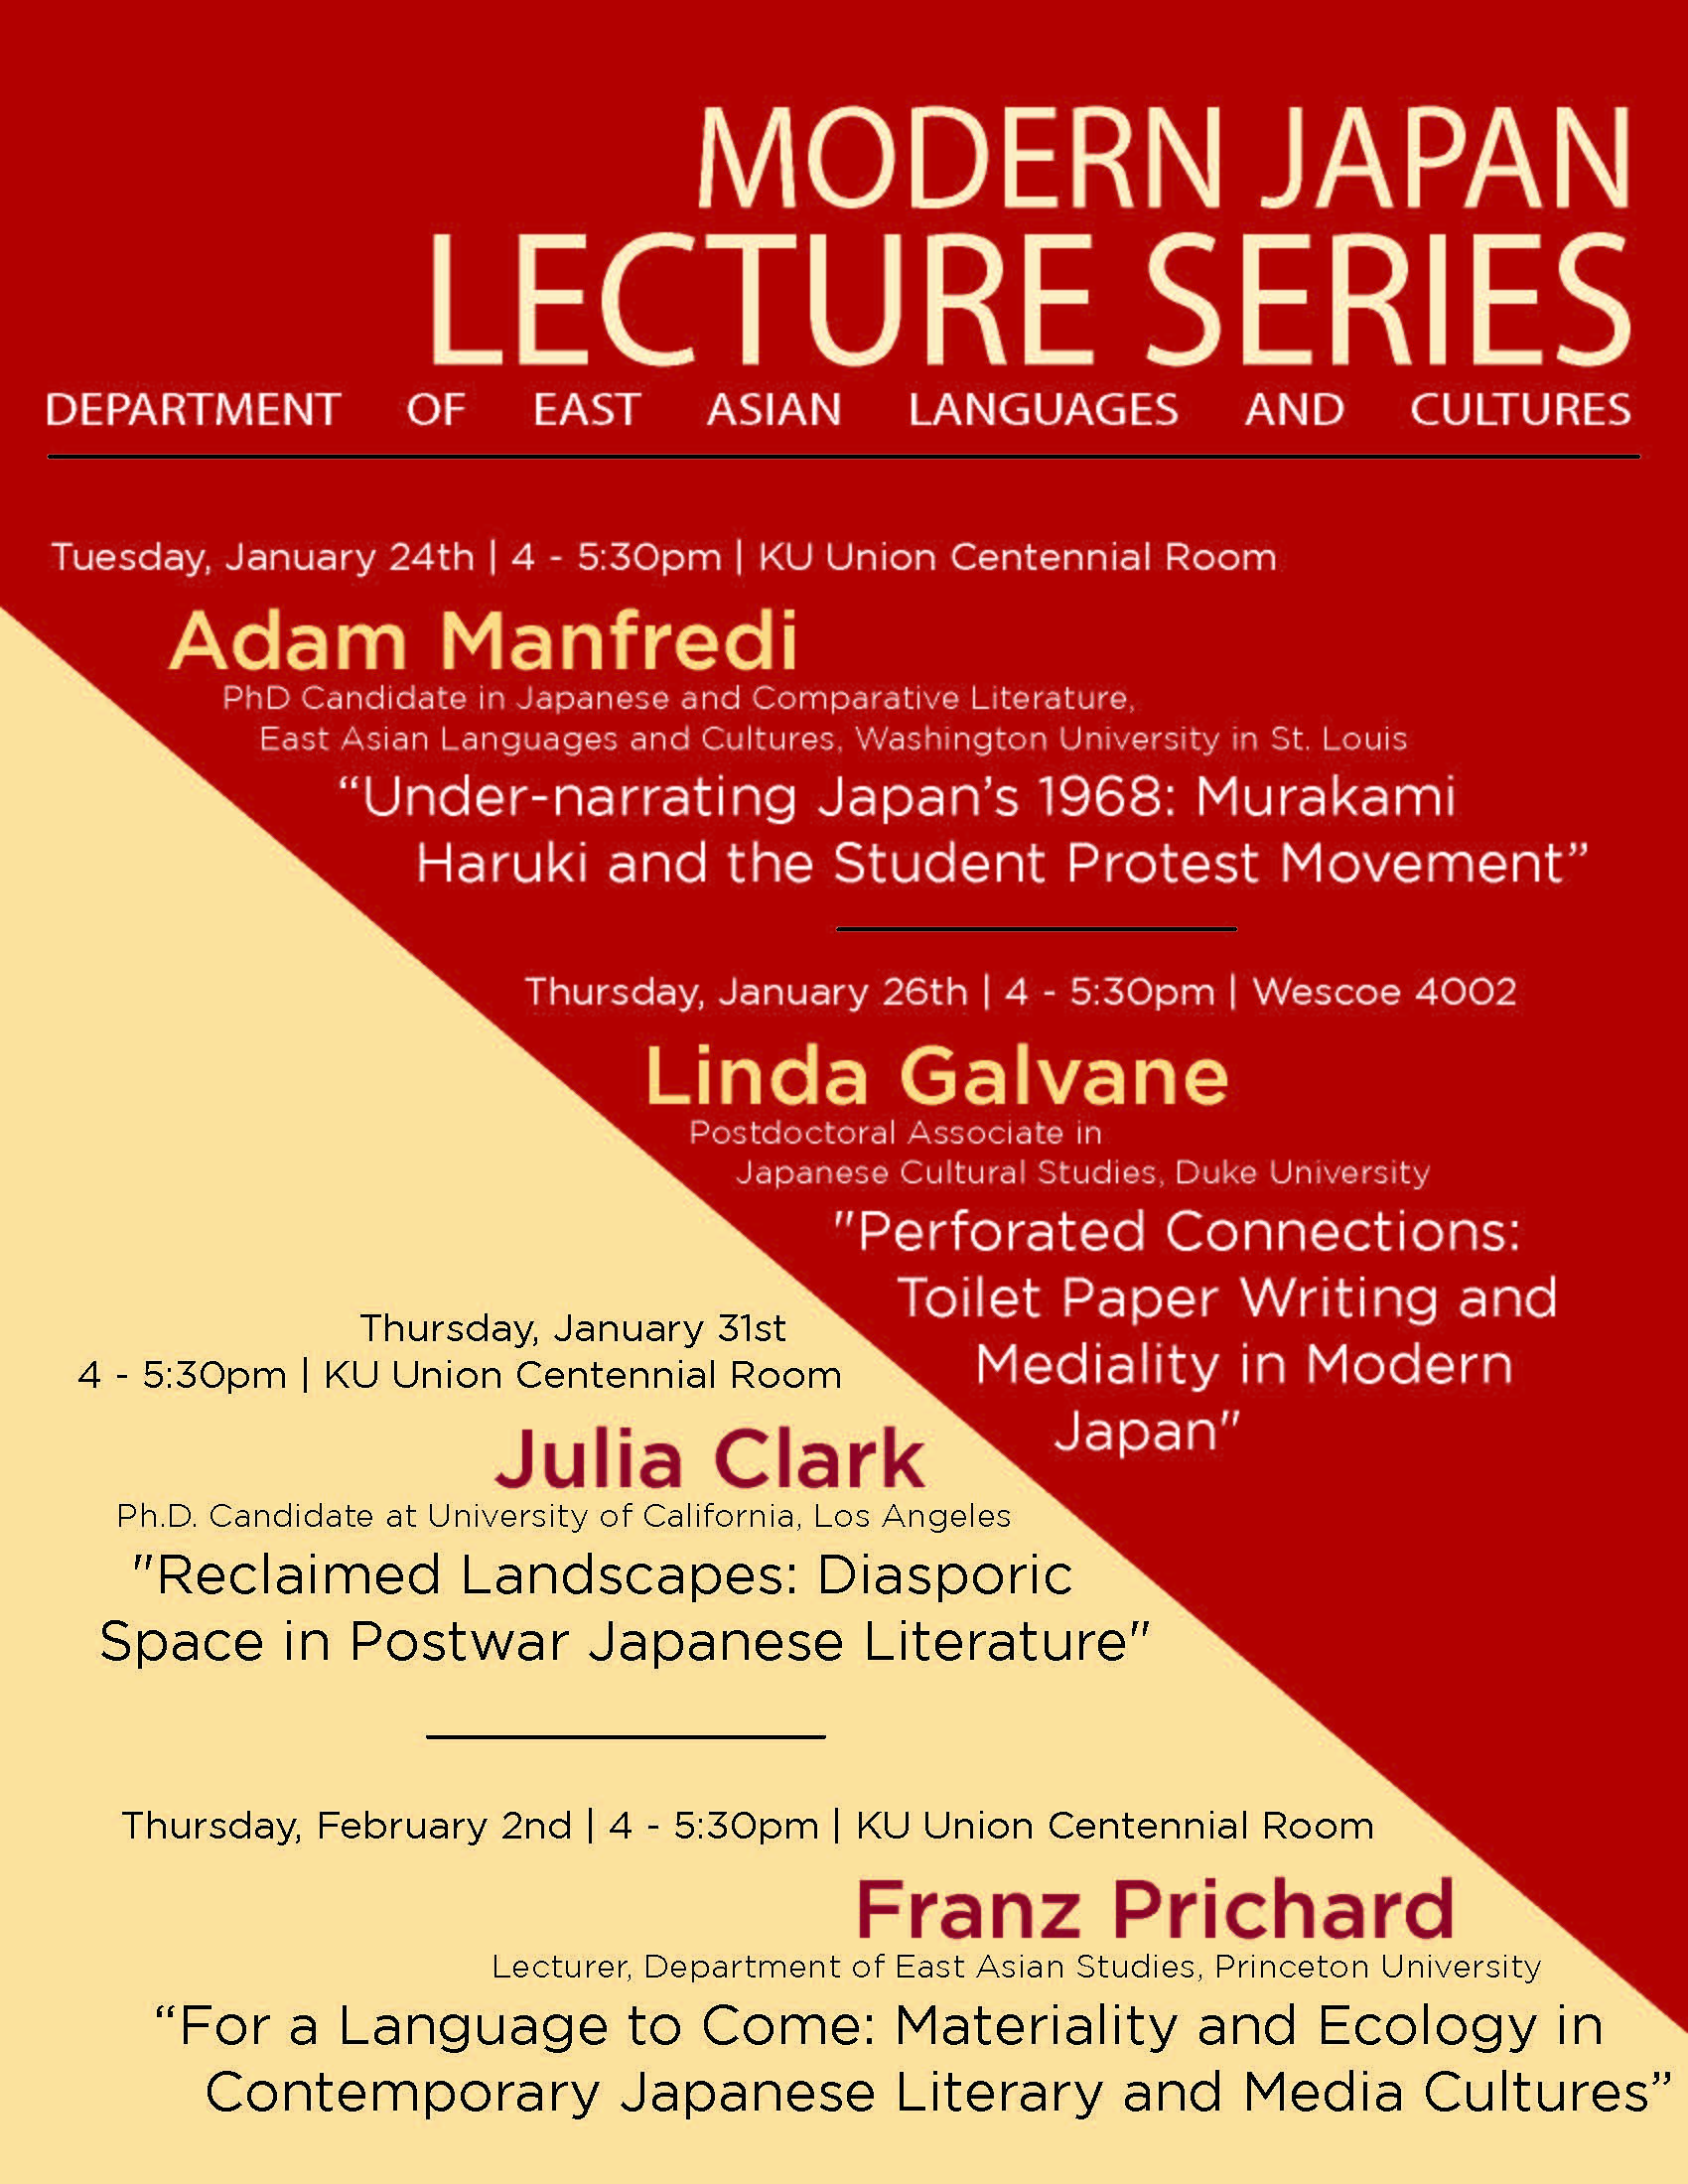 Flyer for Modern Japan Lecture Series containing the information following in this summary